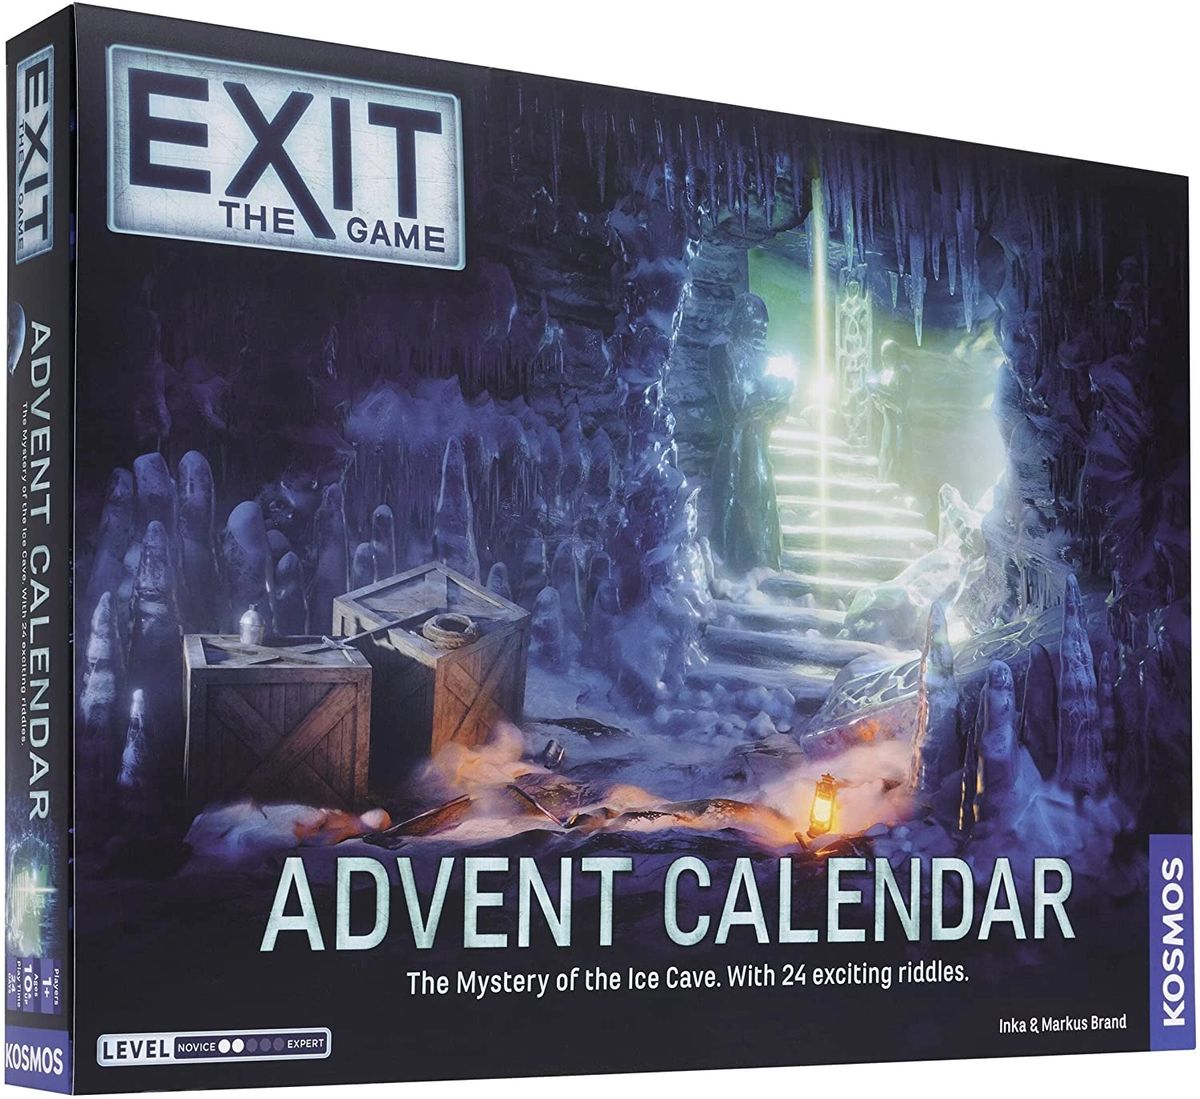 EXIT: Advent Calendar The Mystery of the Ice Cave - 24 Riddles to Solve